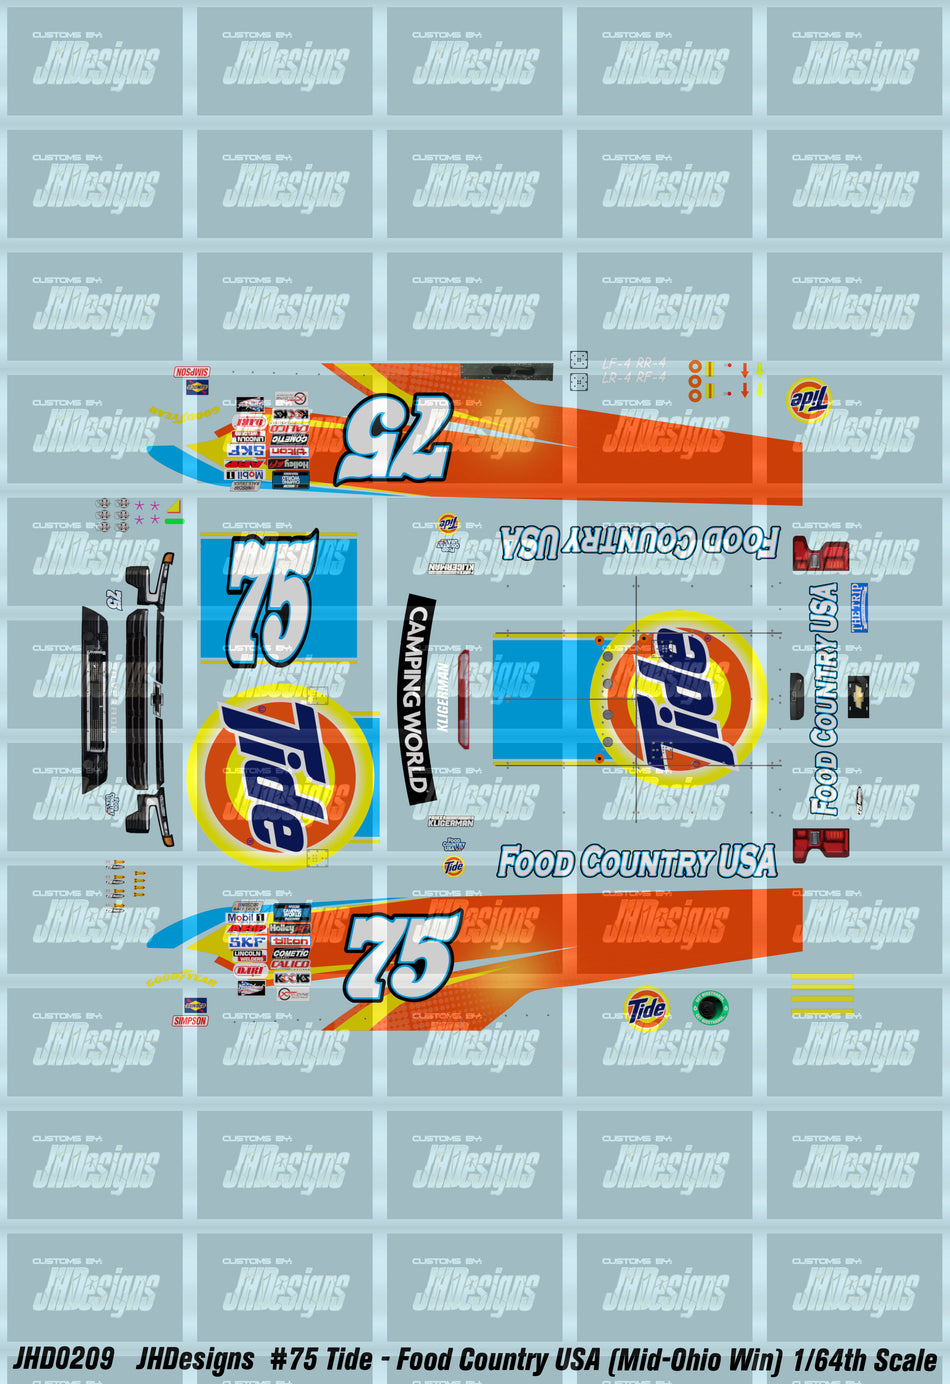 JH Designs Parker Kligerman 2022 CWTS #75 Tide - Food Country USA (Mid-Ohio Race Win) 1:64 Racecar Decal Set